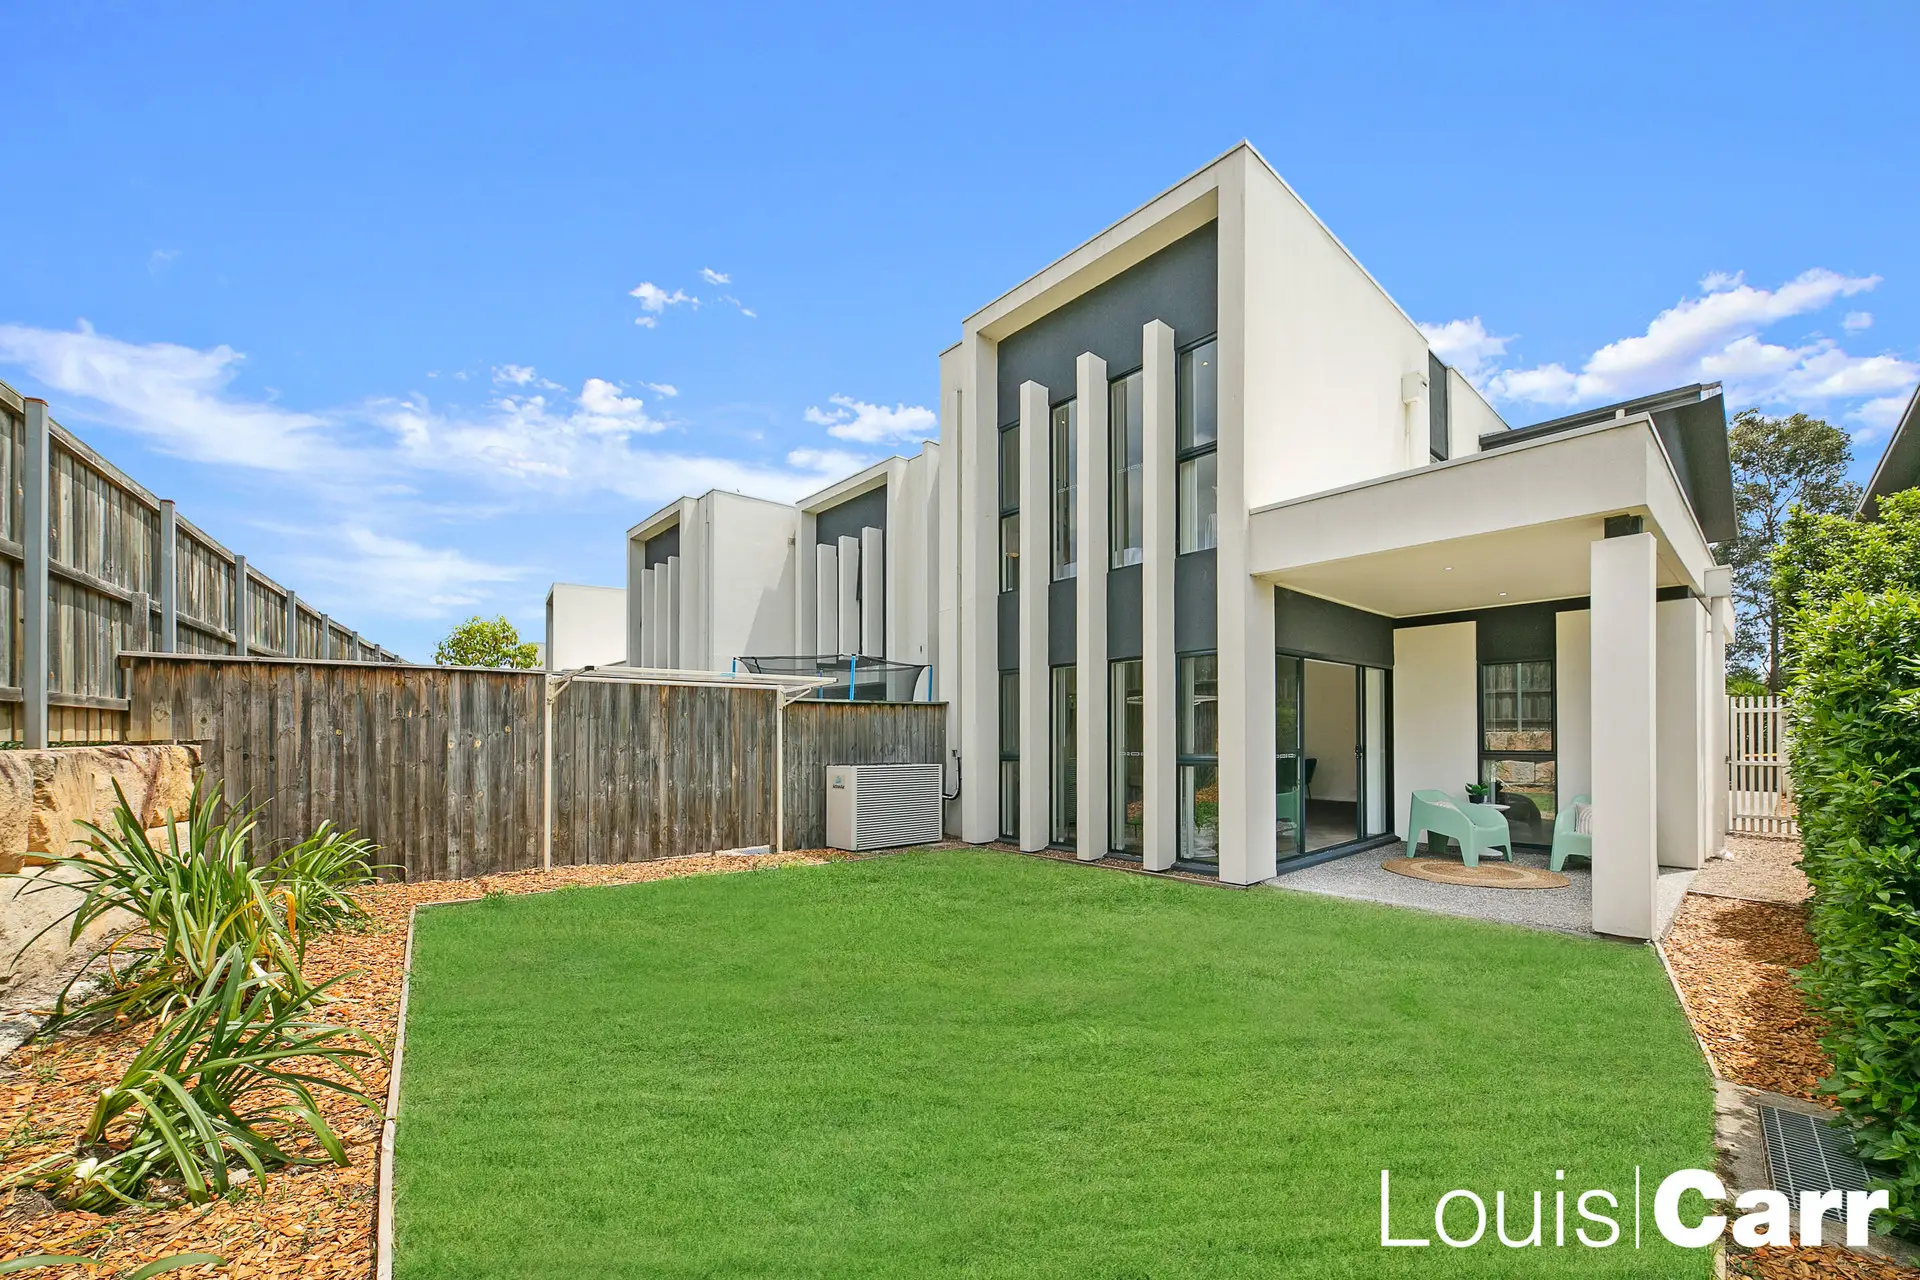 Photo #11: 15 Grace Crescent, Kellyville - Sold by Louis Carr Real Estate